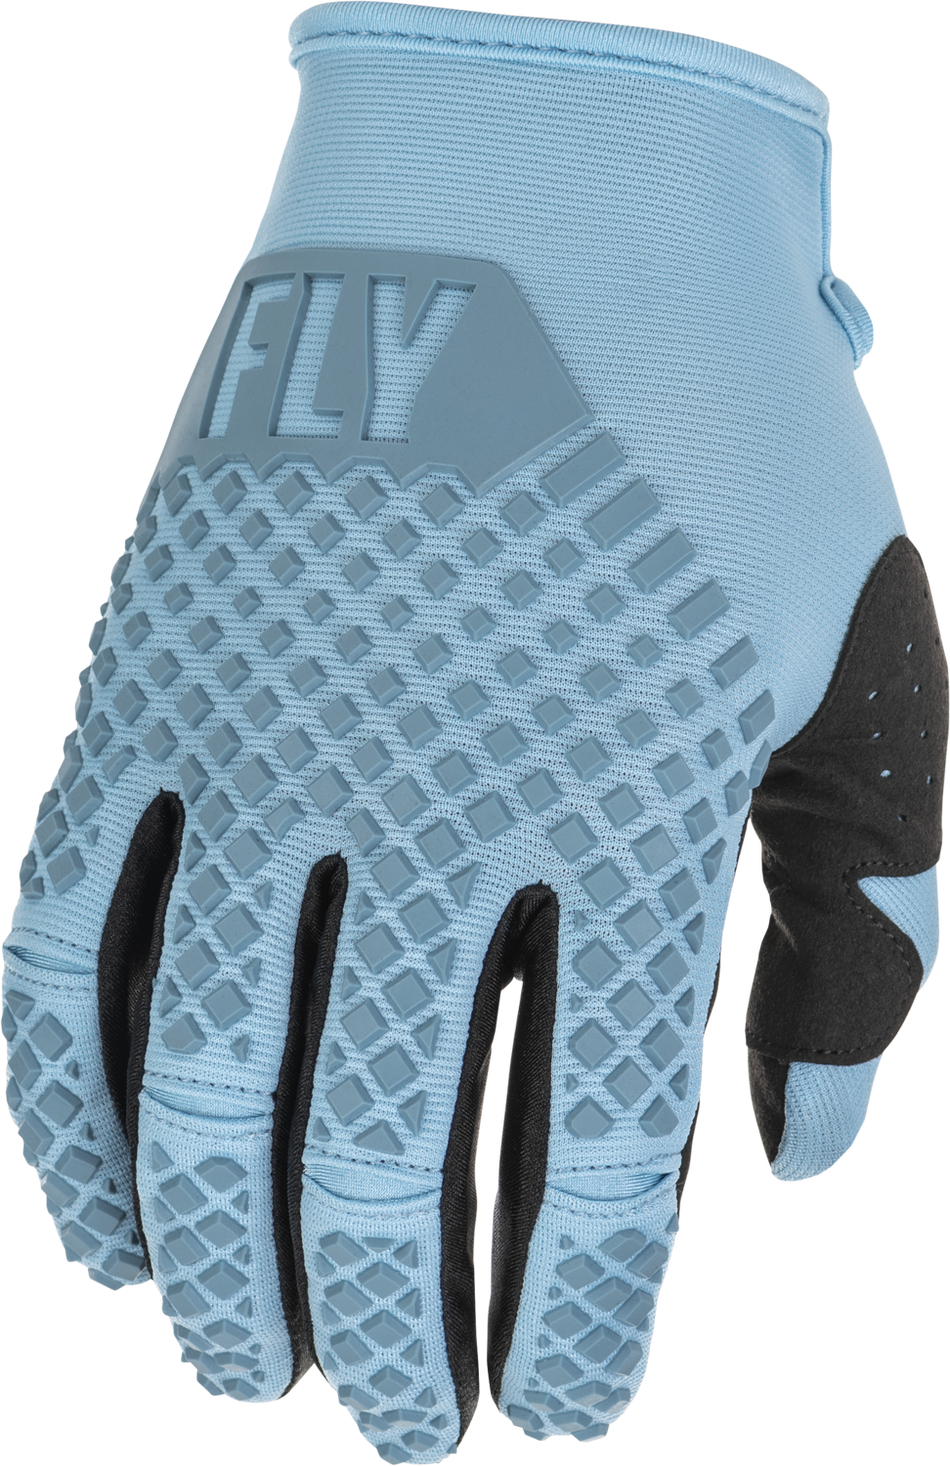 FLY RACING Kinetic Gloves Light Blue Sm 375-414S